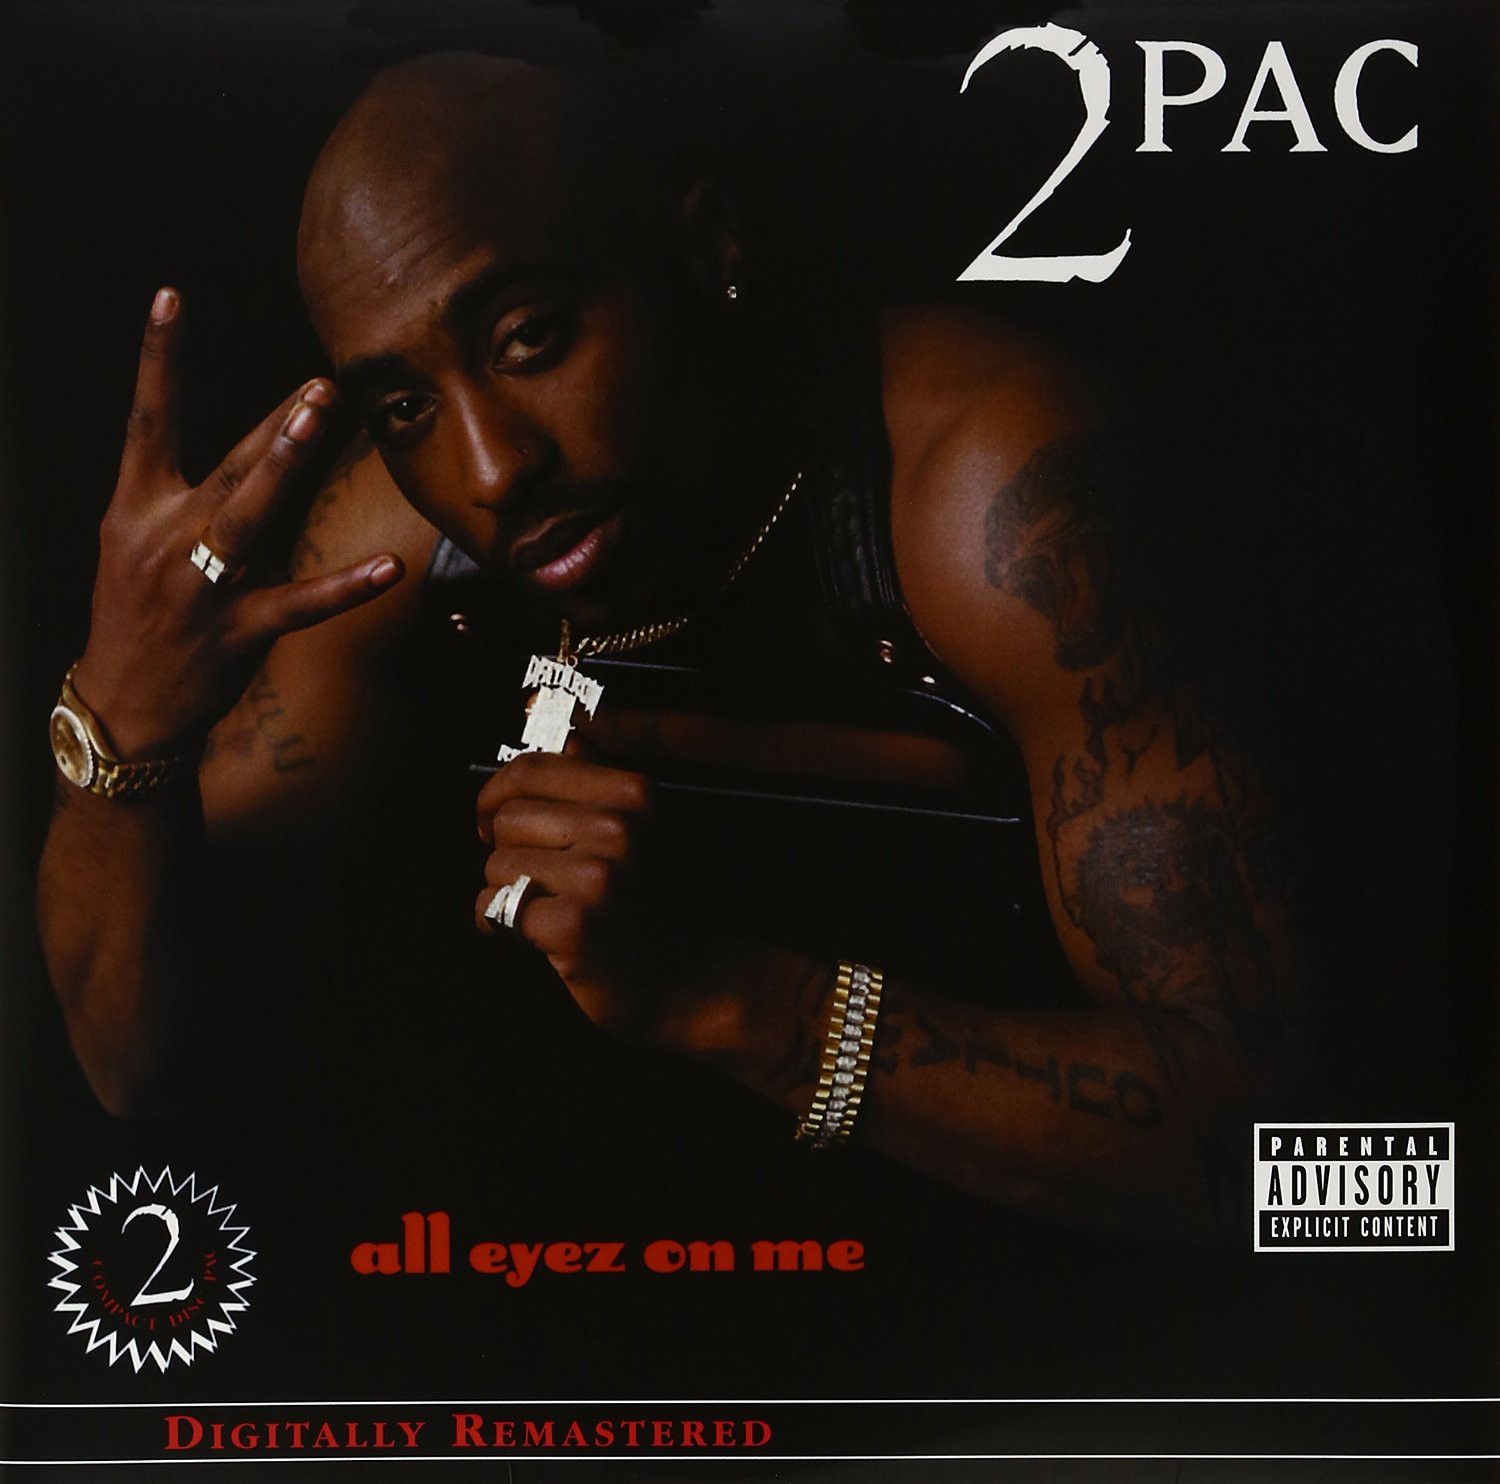 2pac me against the world album cover hd